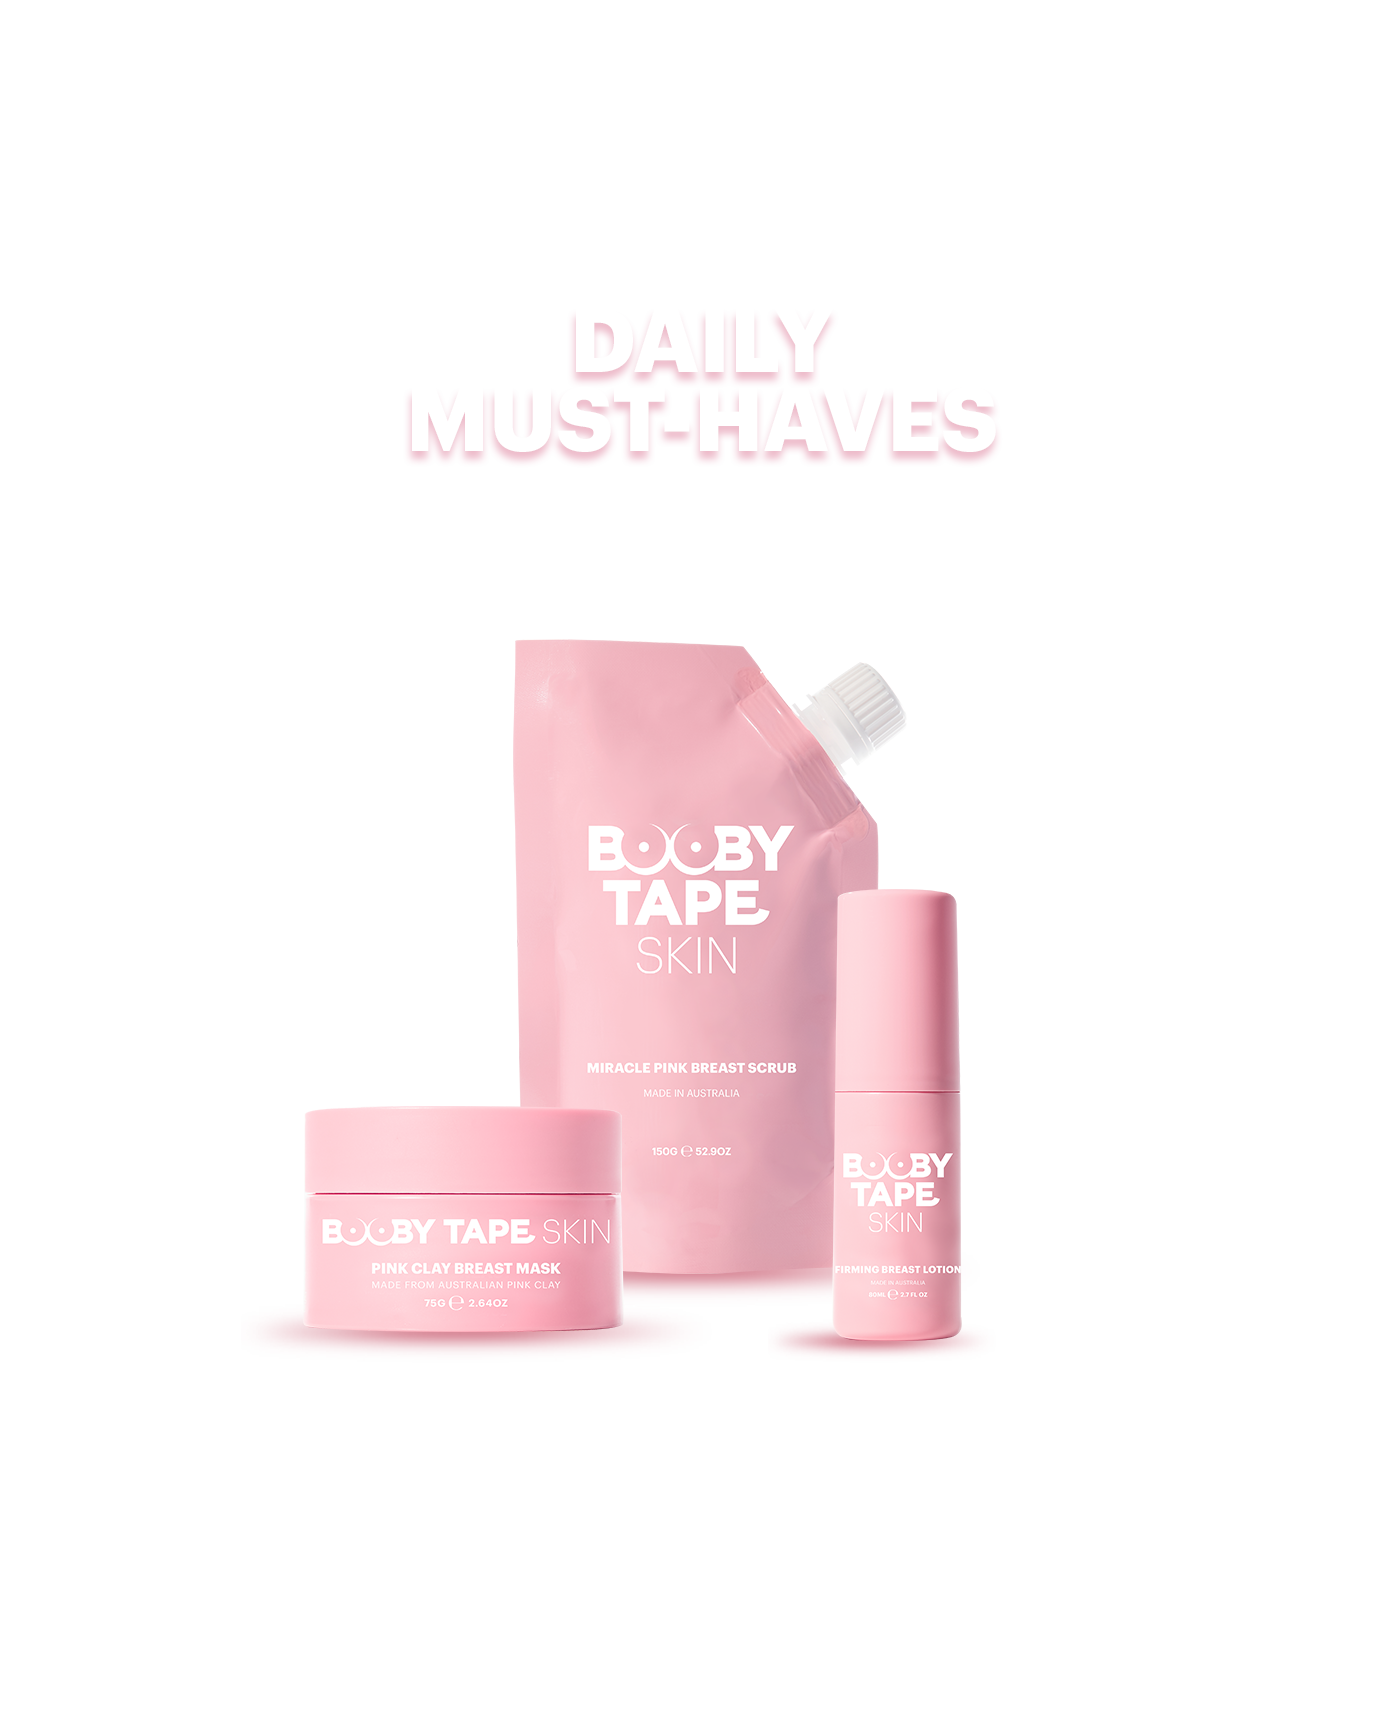 Daily Must-Haves